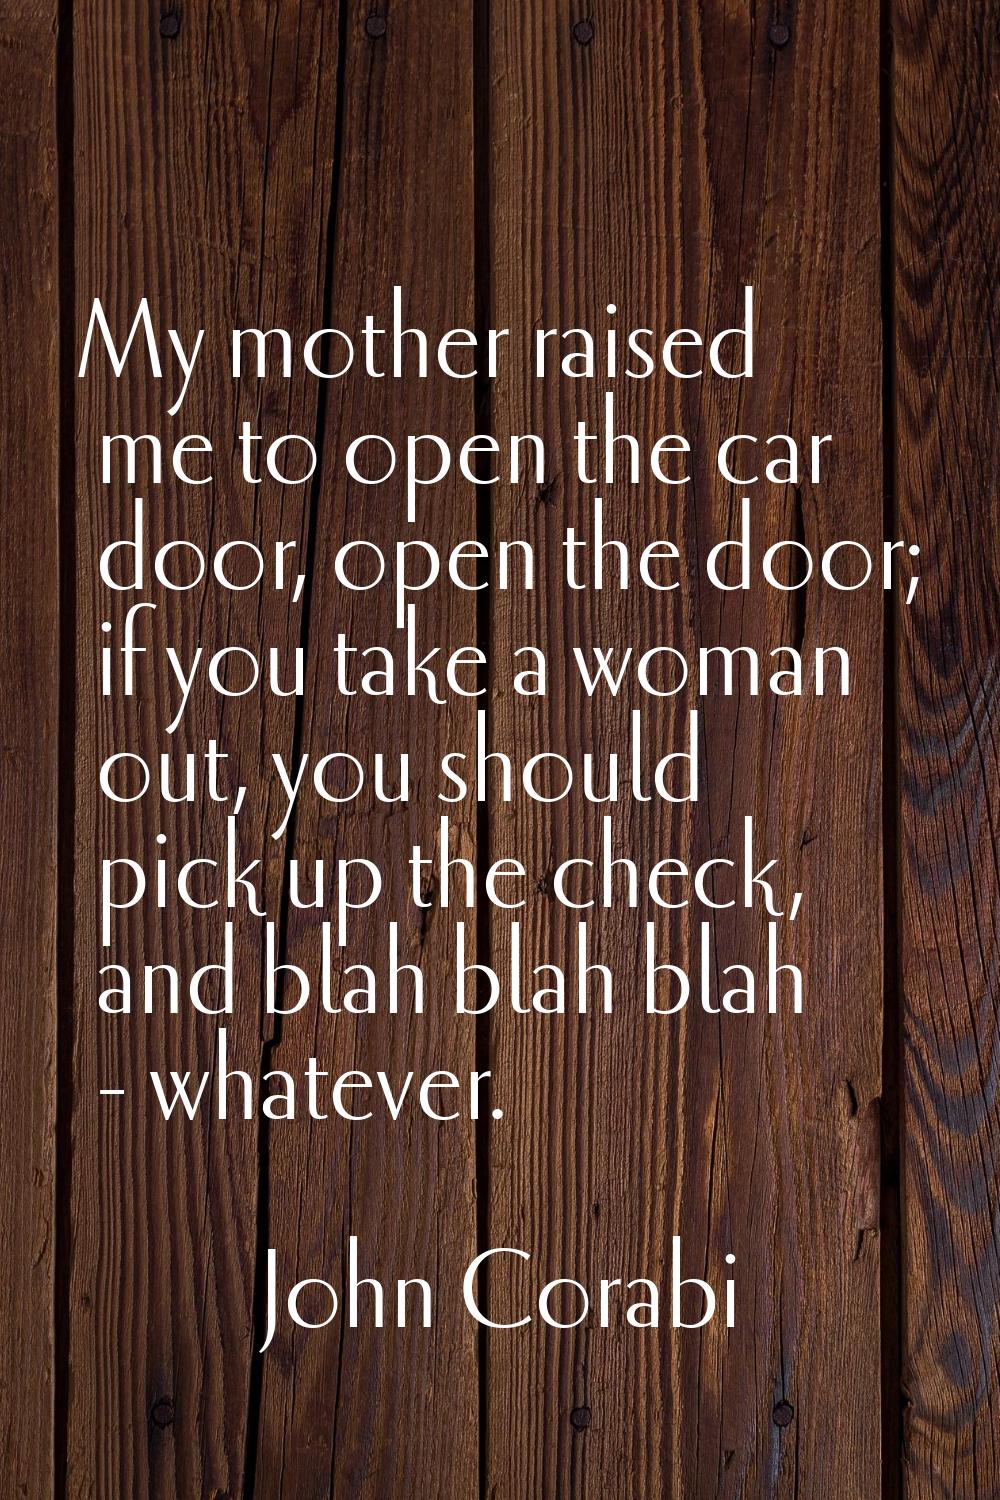 My mother raised me to open the car door, open the door; if you take a woman out, you should pick u